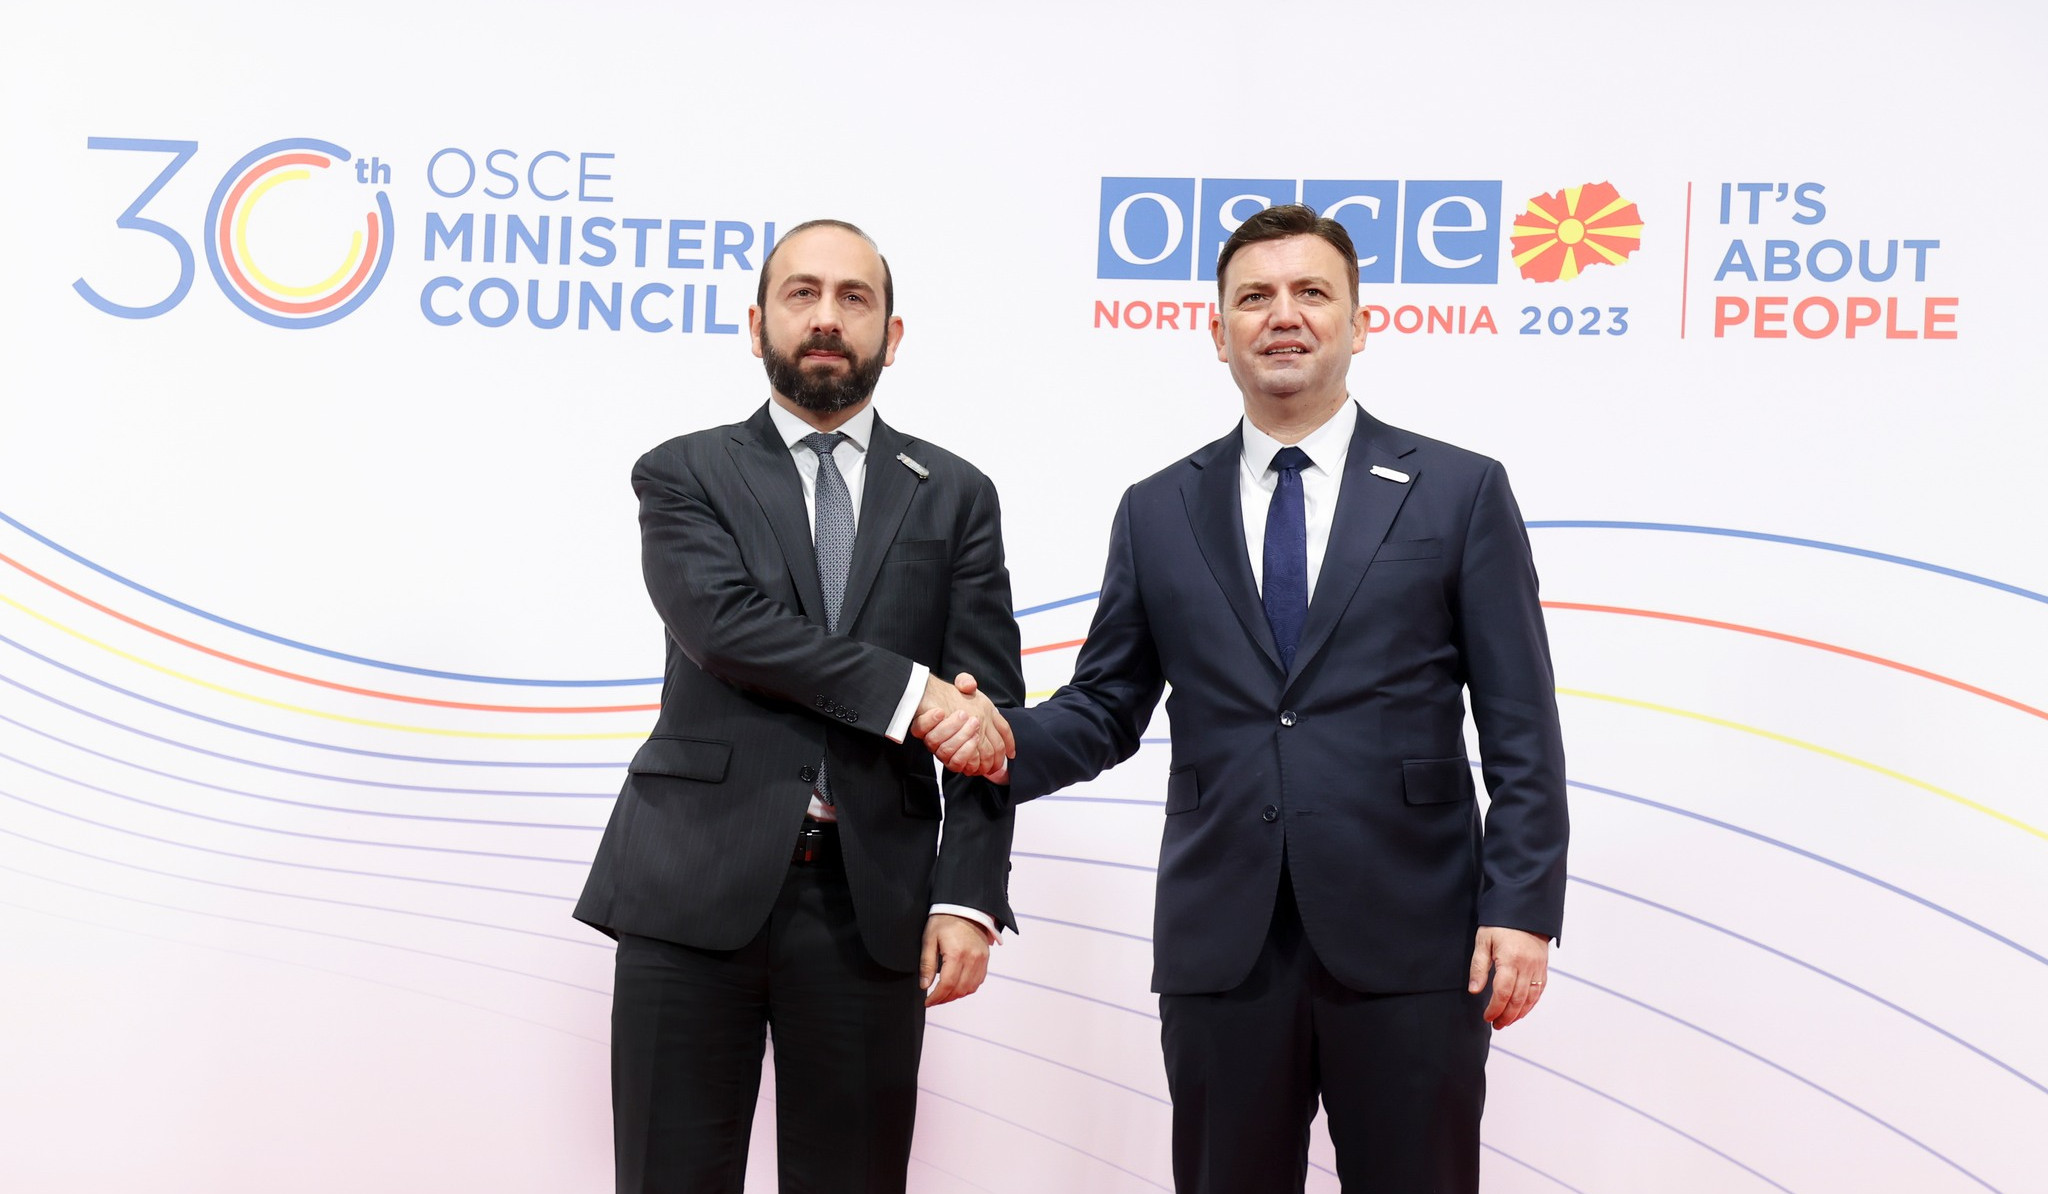 Osmani welcomes Mirzoyan at OSCE 30th Ministerial Council